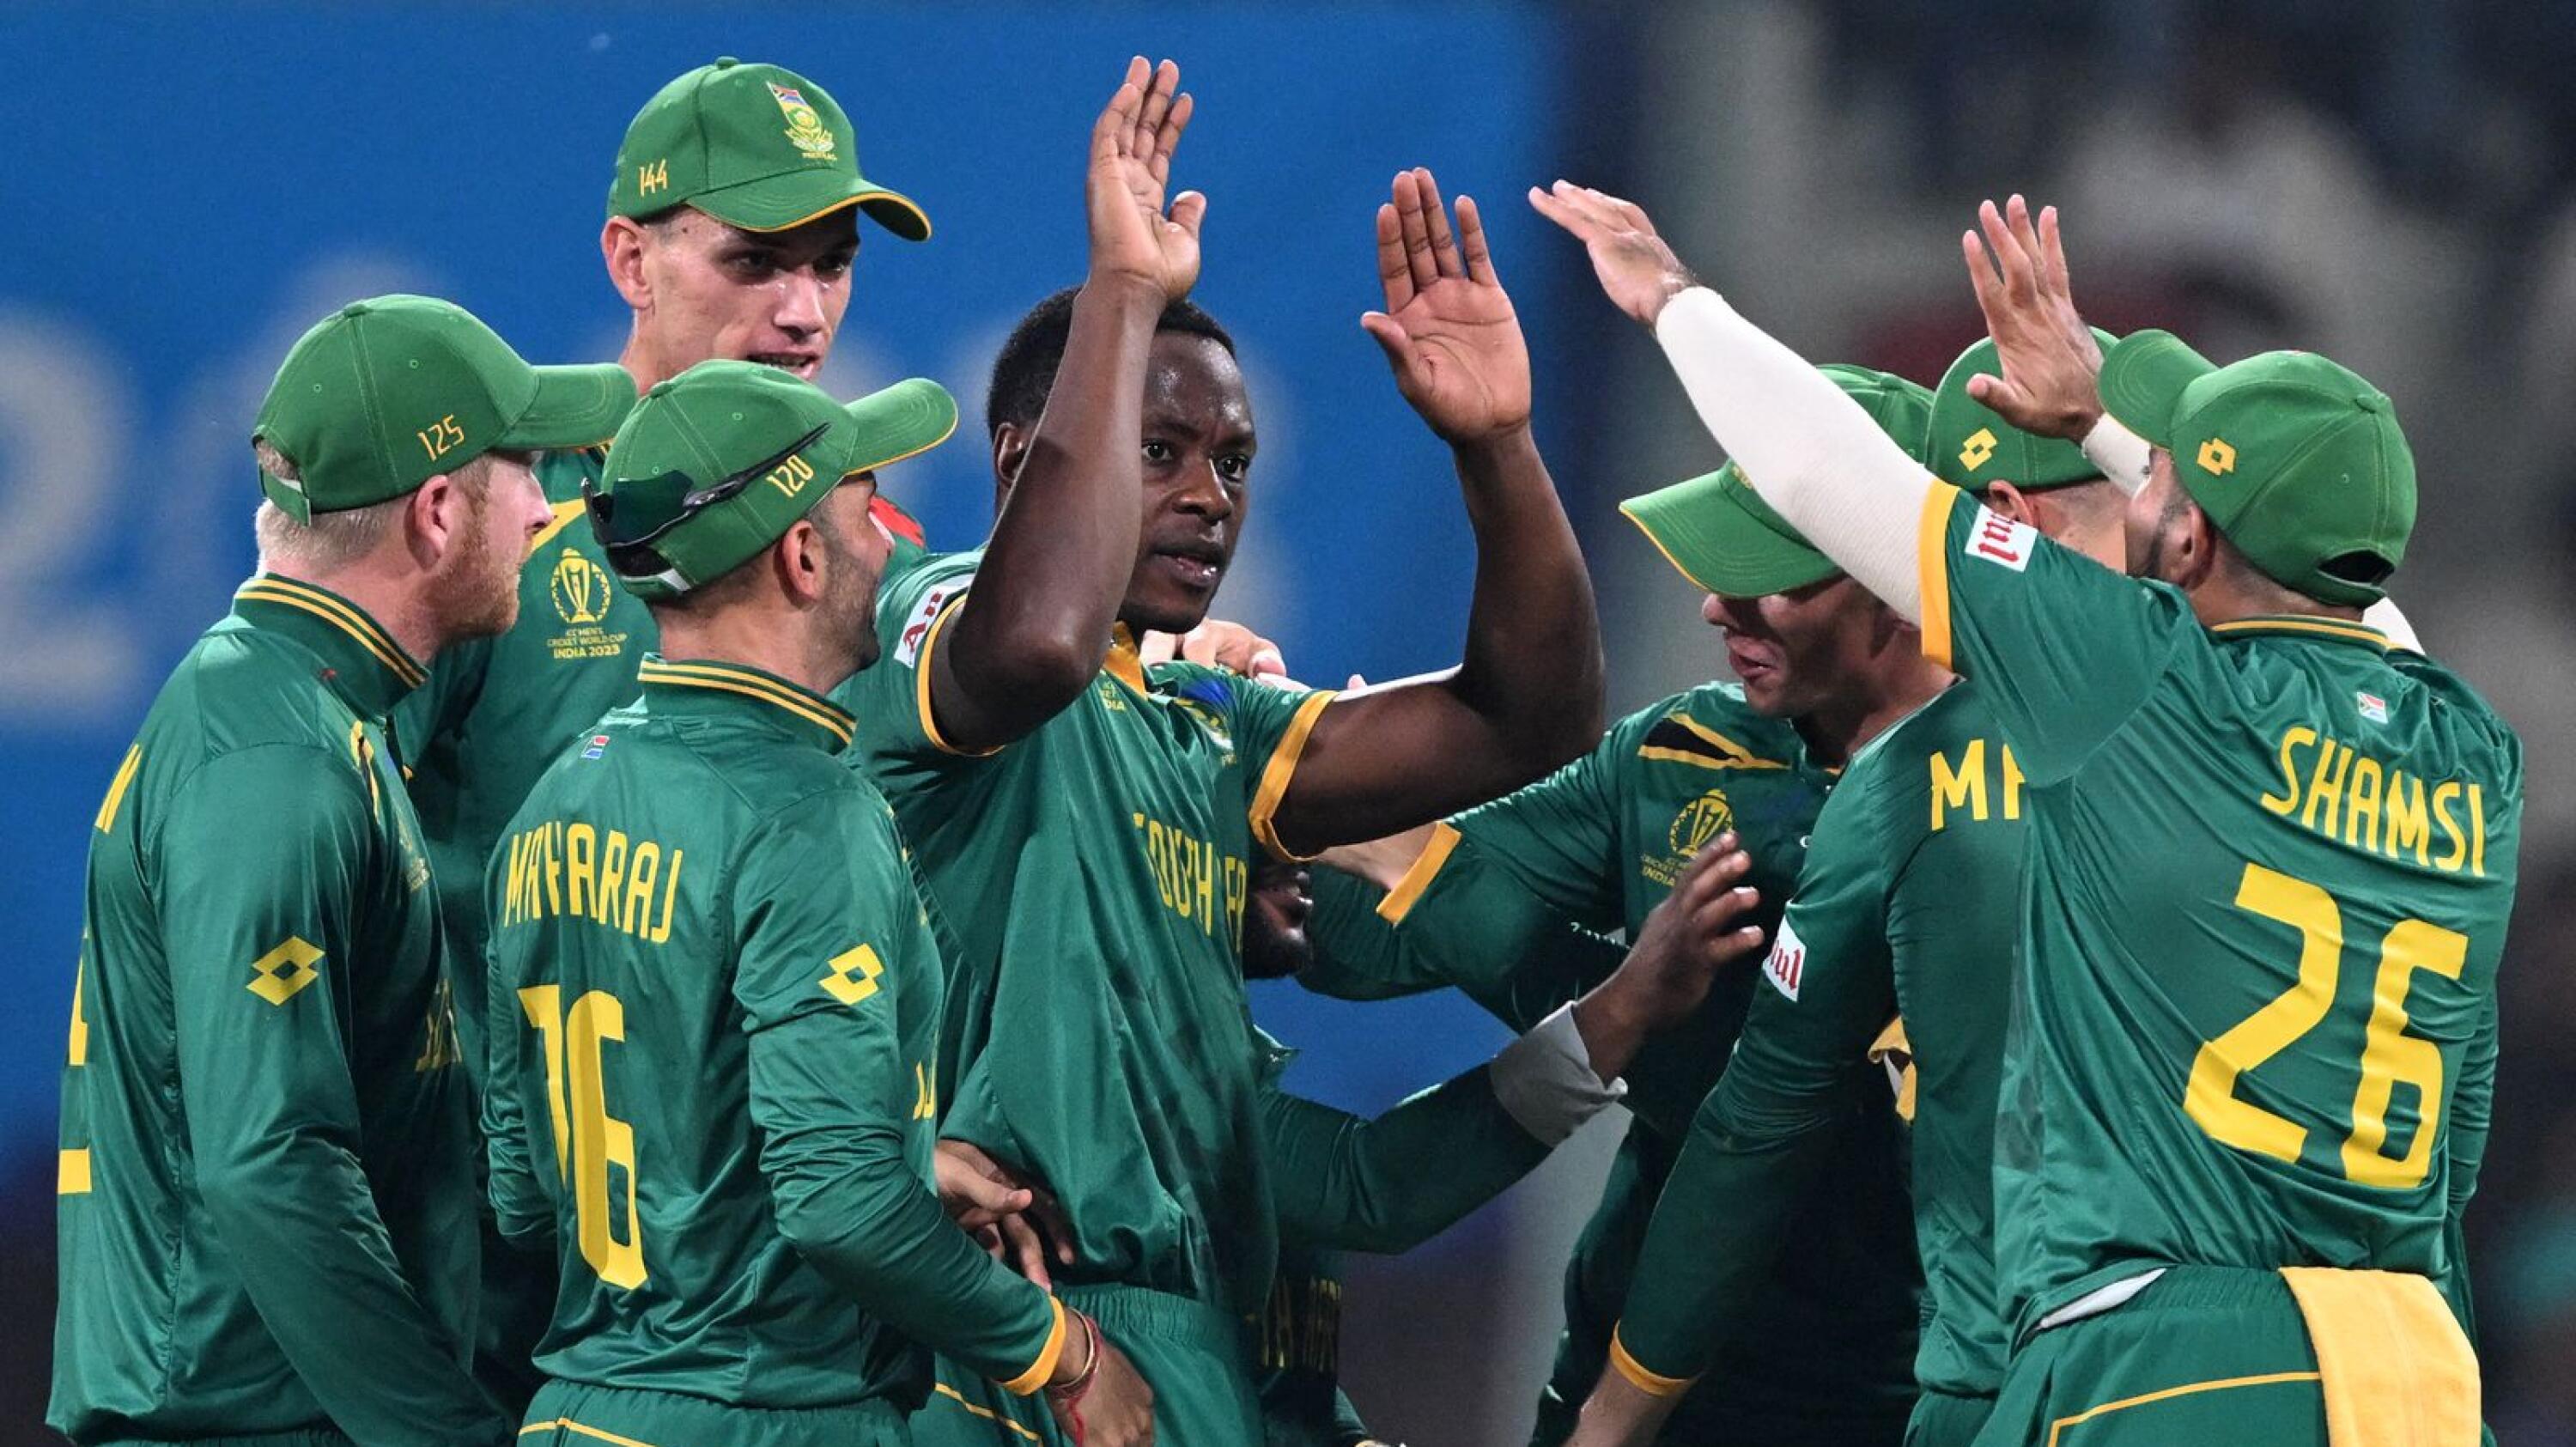 South Africa's Kagiso Rabada celebrates with teammates after taking the wicket of Australia's Steve Smith